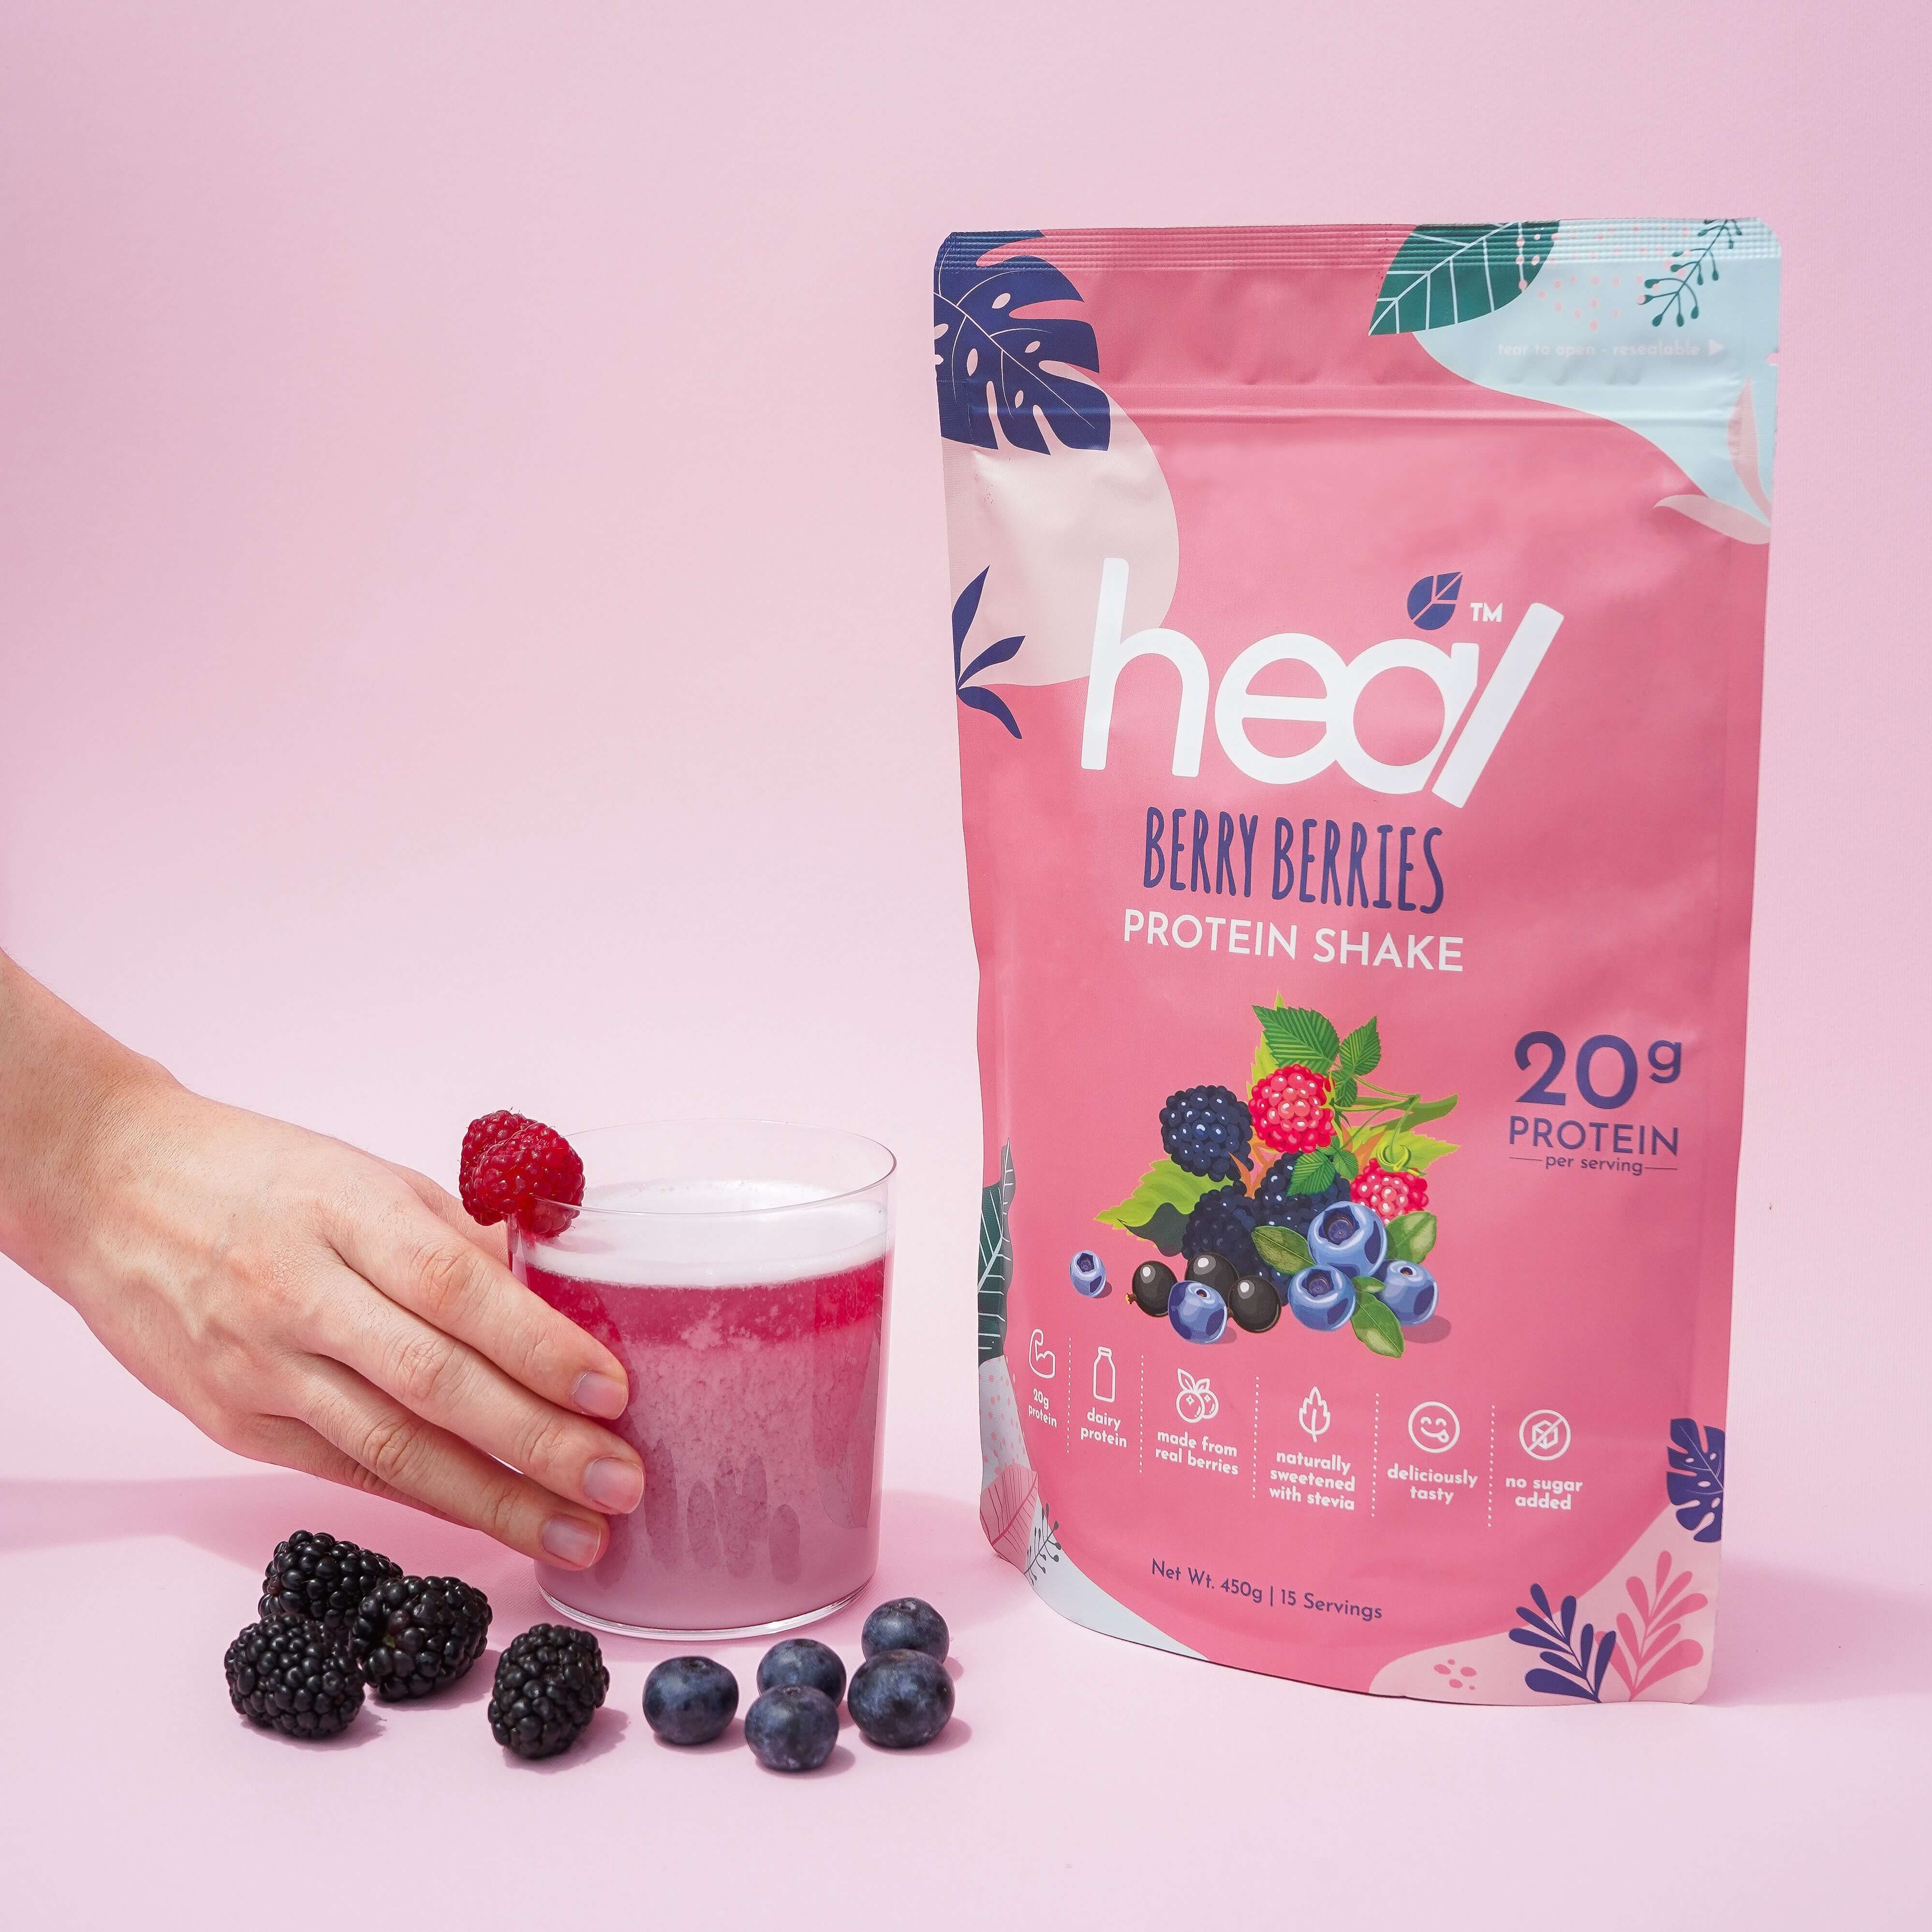 [Subscription Plan] Berry Berries Protein Shake, 16 Sachets (30g)